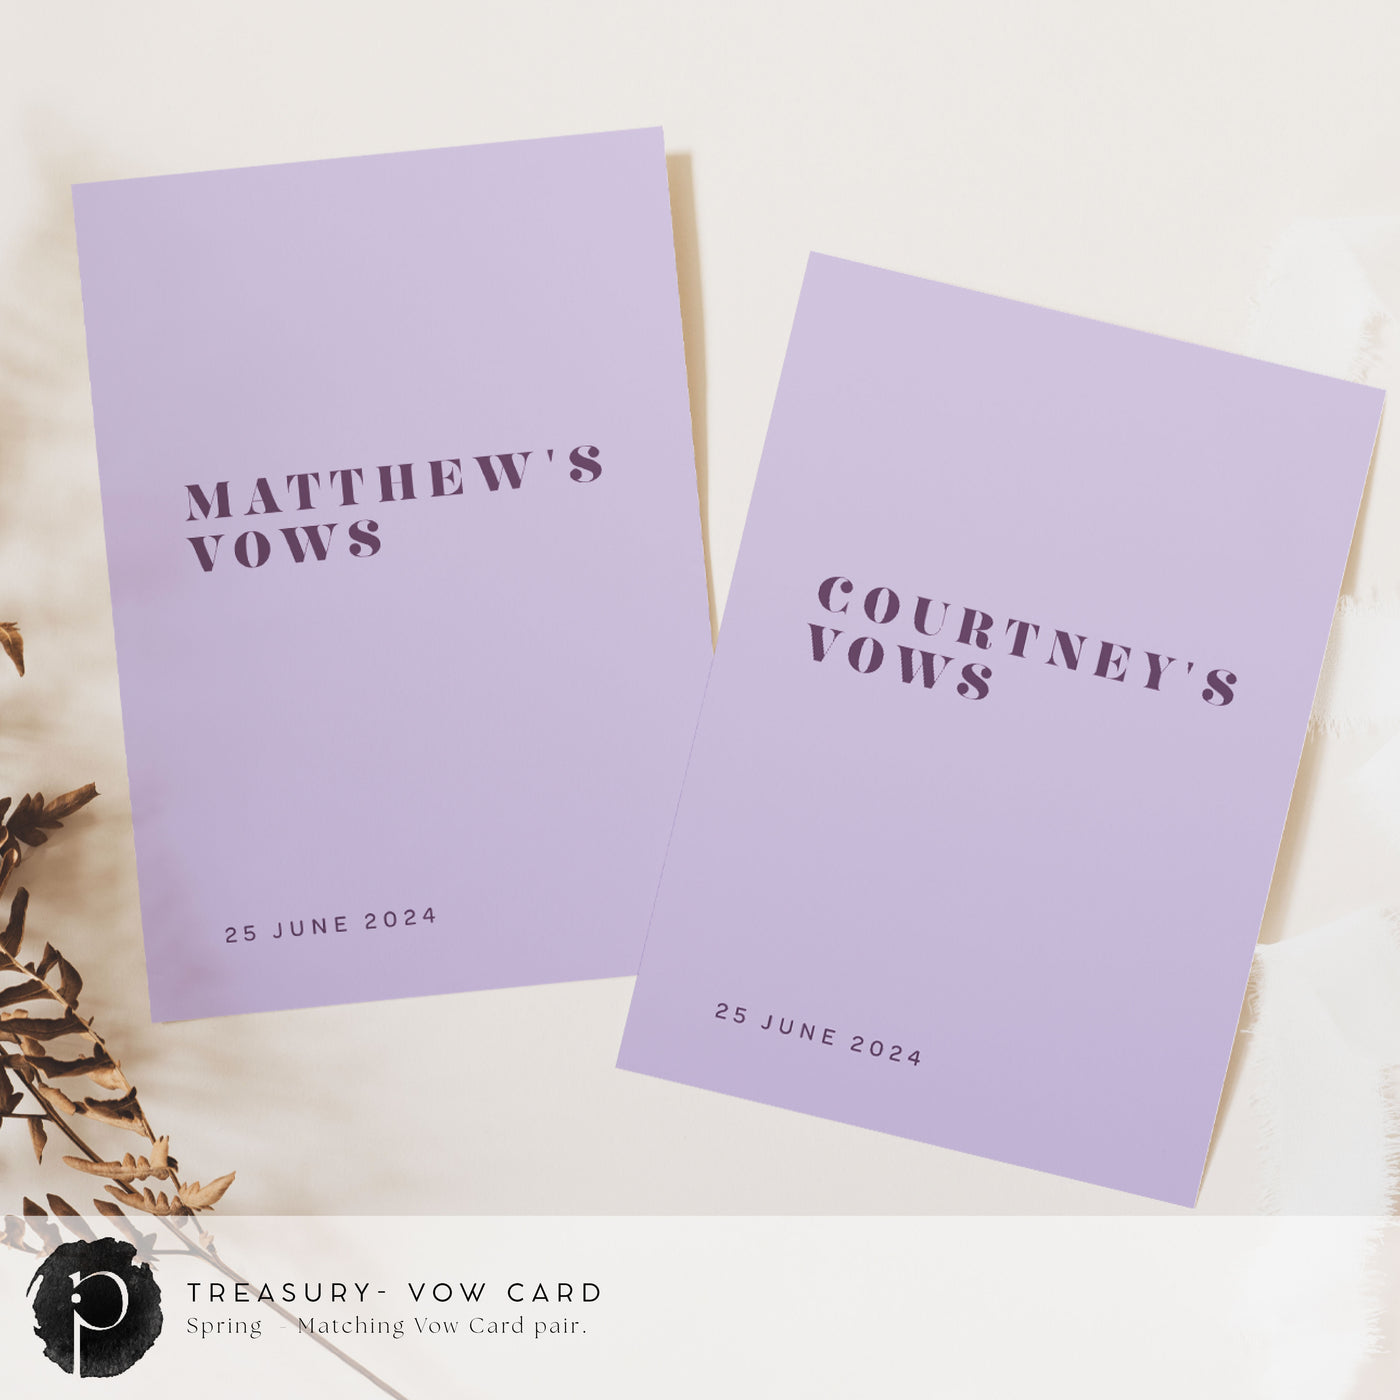 A pair of vow cards to write your wedding vows on in a formal modern wedding theme with dark purple writing on a light purple background